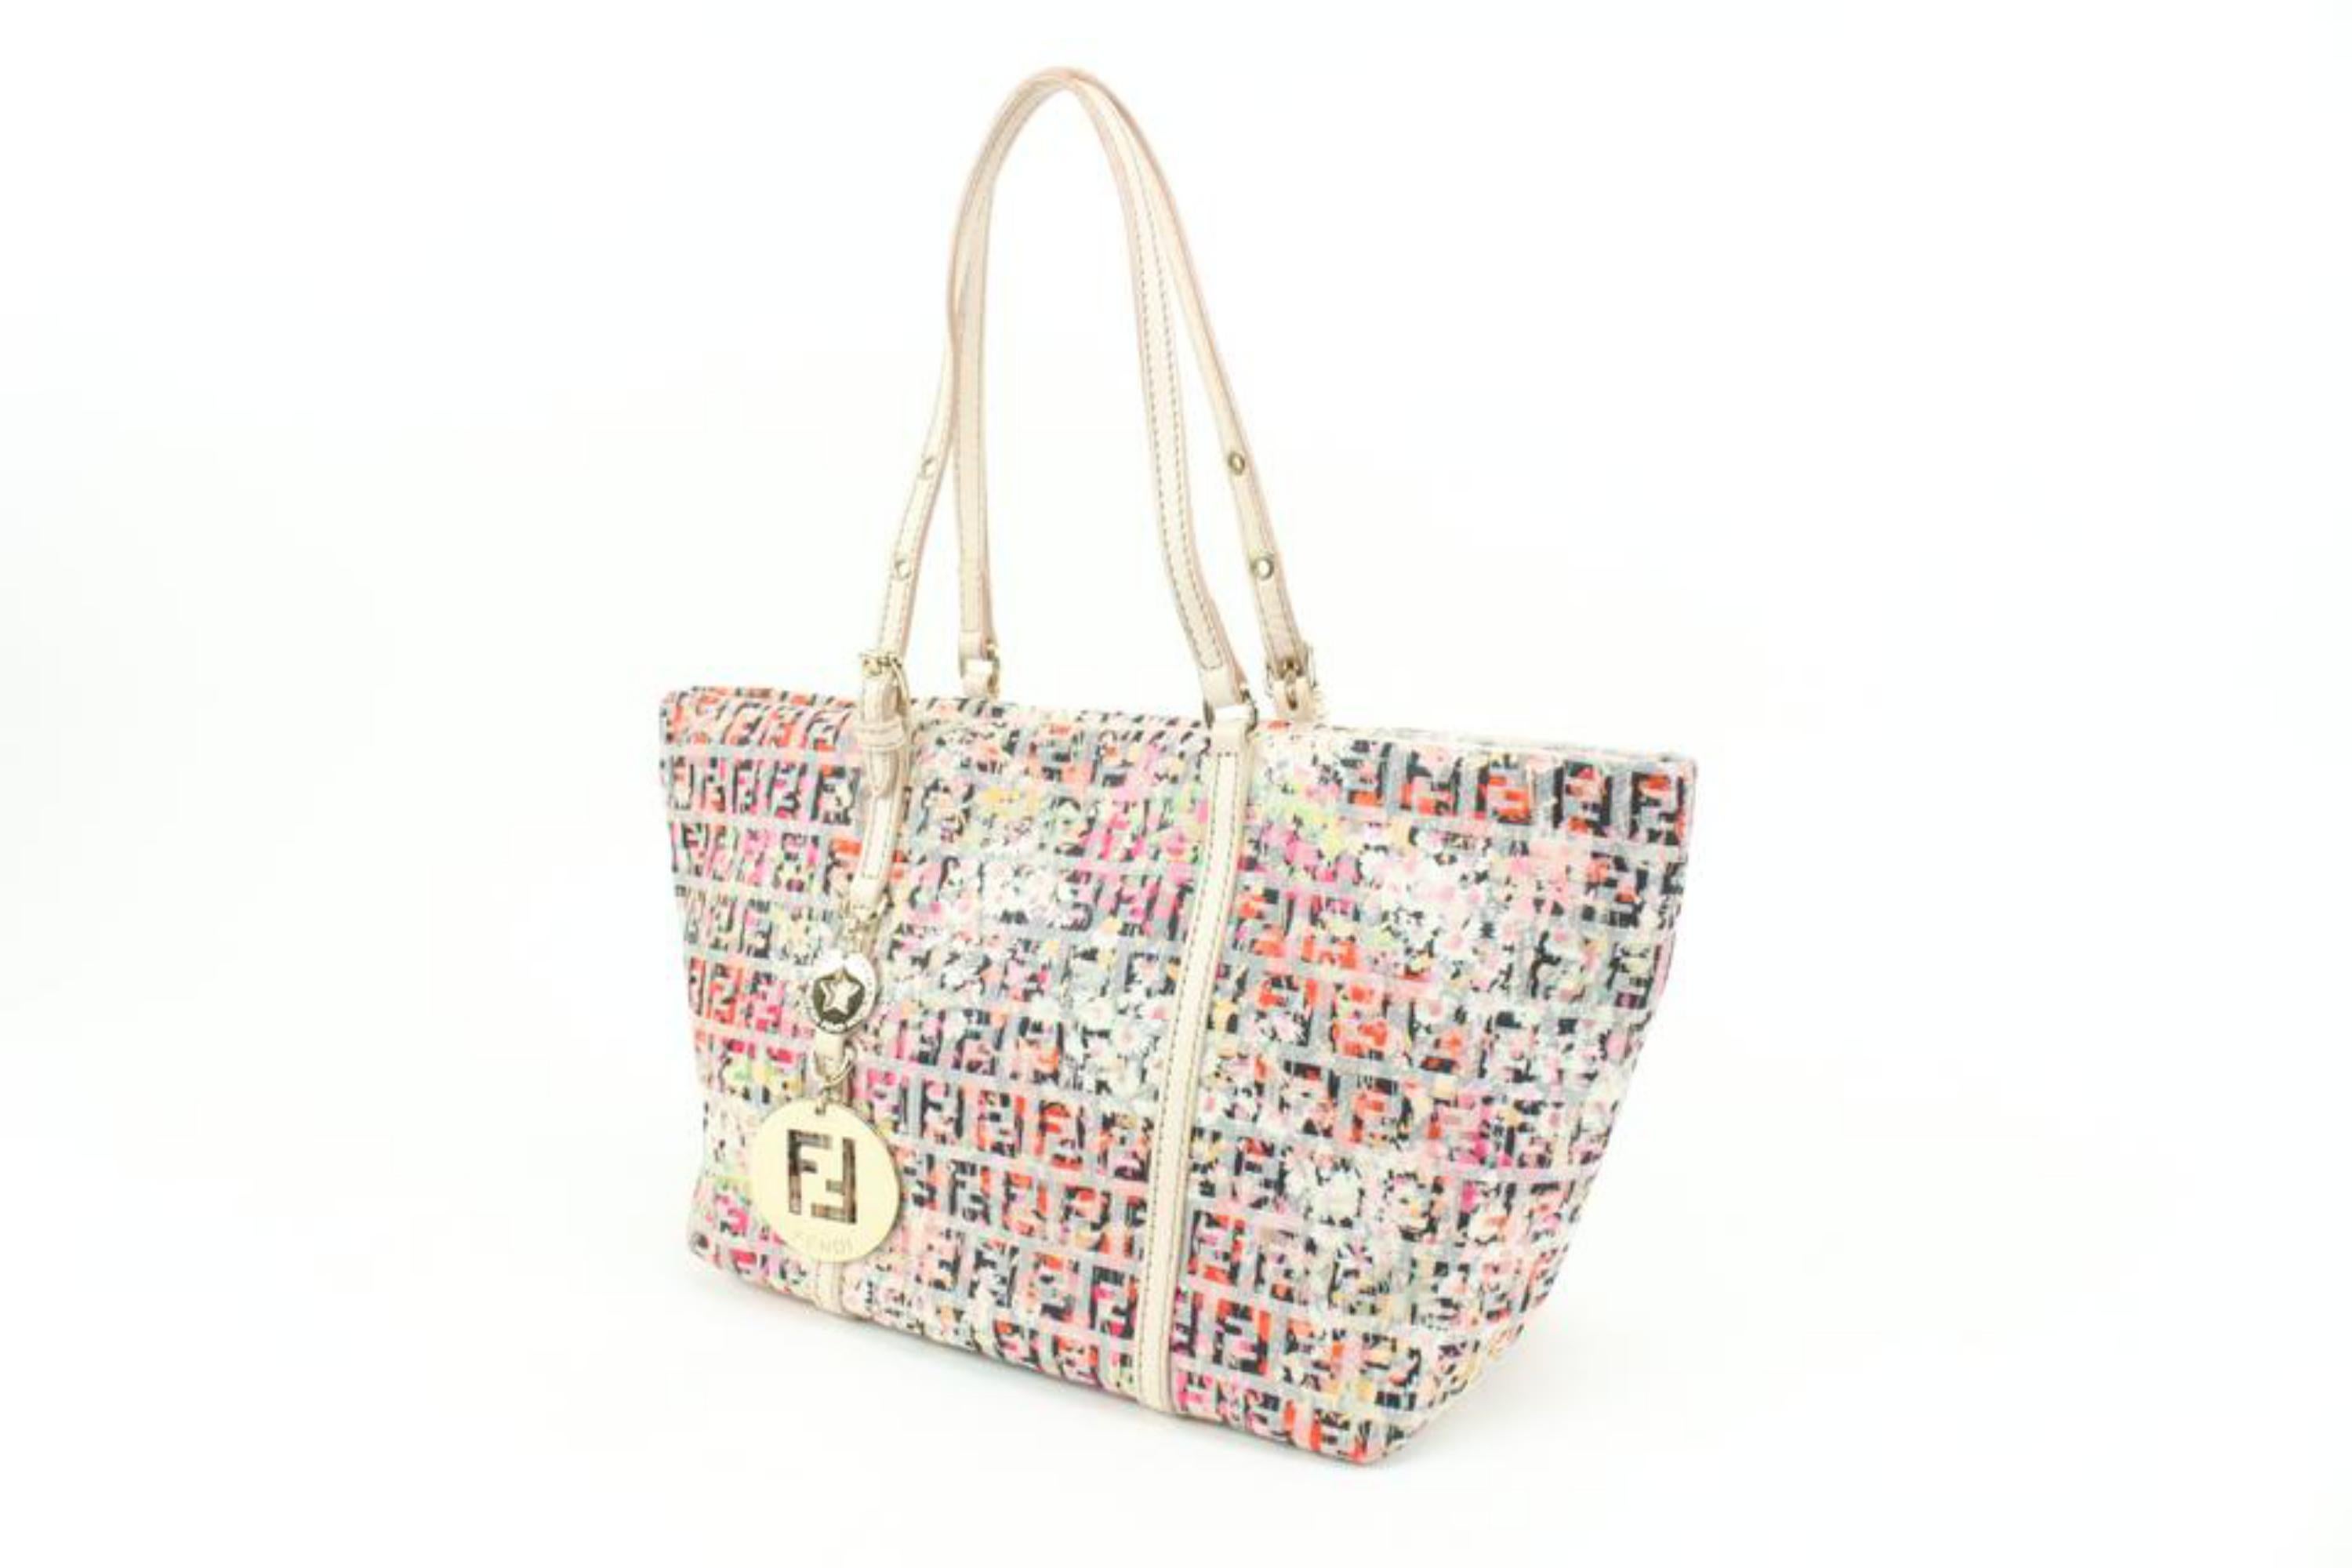 Fendi Multicolor Zucchino Floral Print Canvas Superstar Shopping Tote 39f37s
Date Code/Serial Number: 
Made In: Italy
Measurements: Length:  13.5